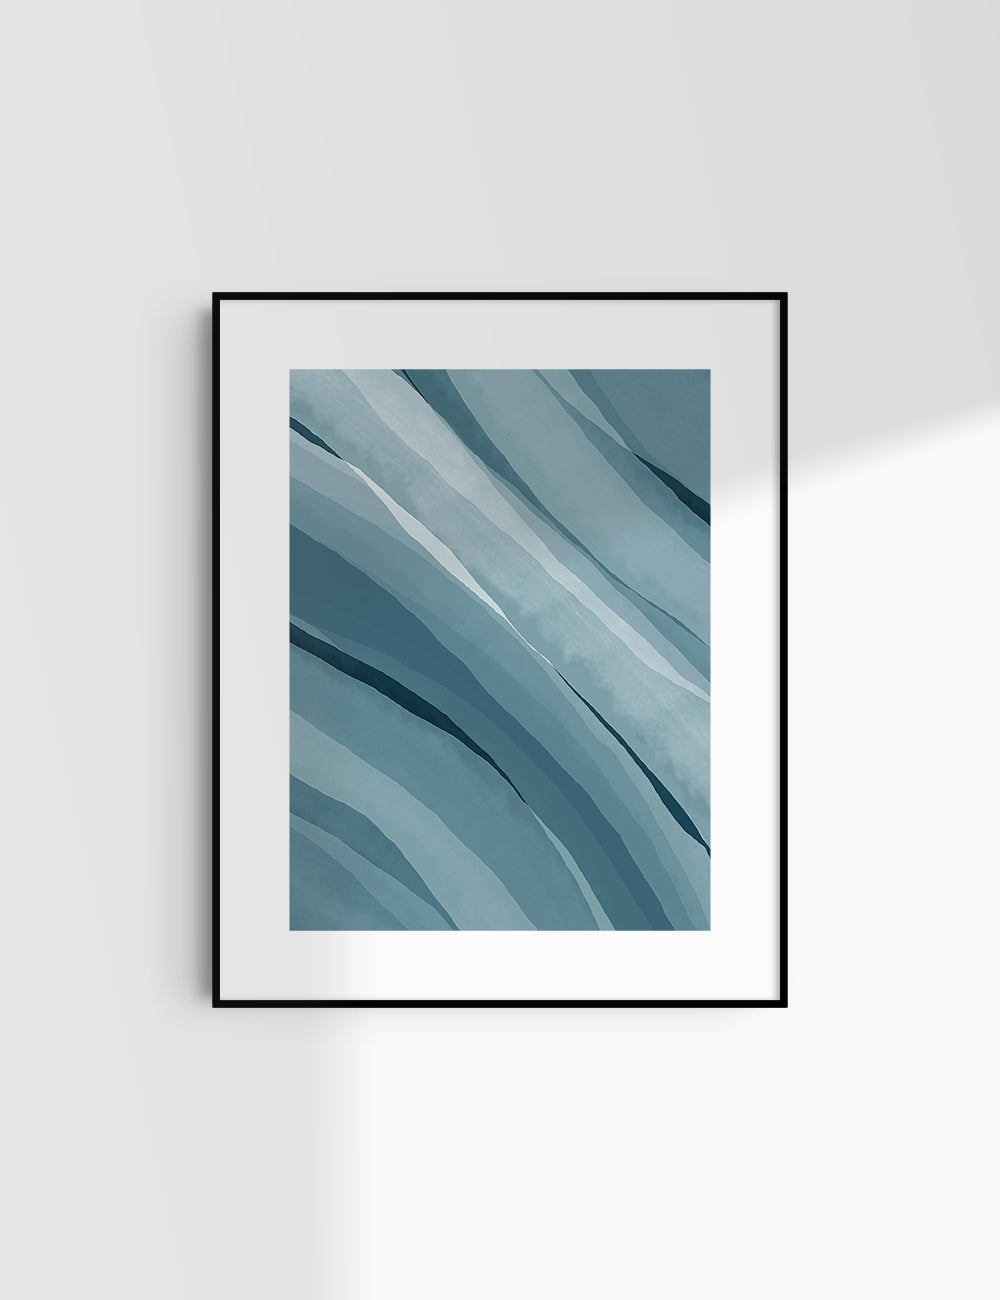 BLUE WATERCOLOR ABSTRACT. Aesthetic. Minimalist. Abstract Watercolor Painting. Printable Wall Art. - PAPER MOON Art & Design